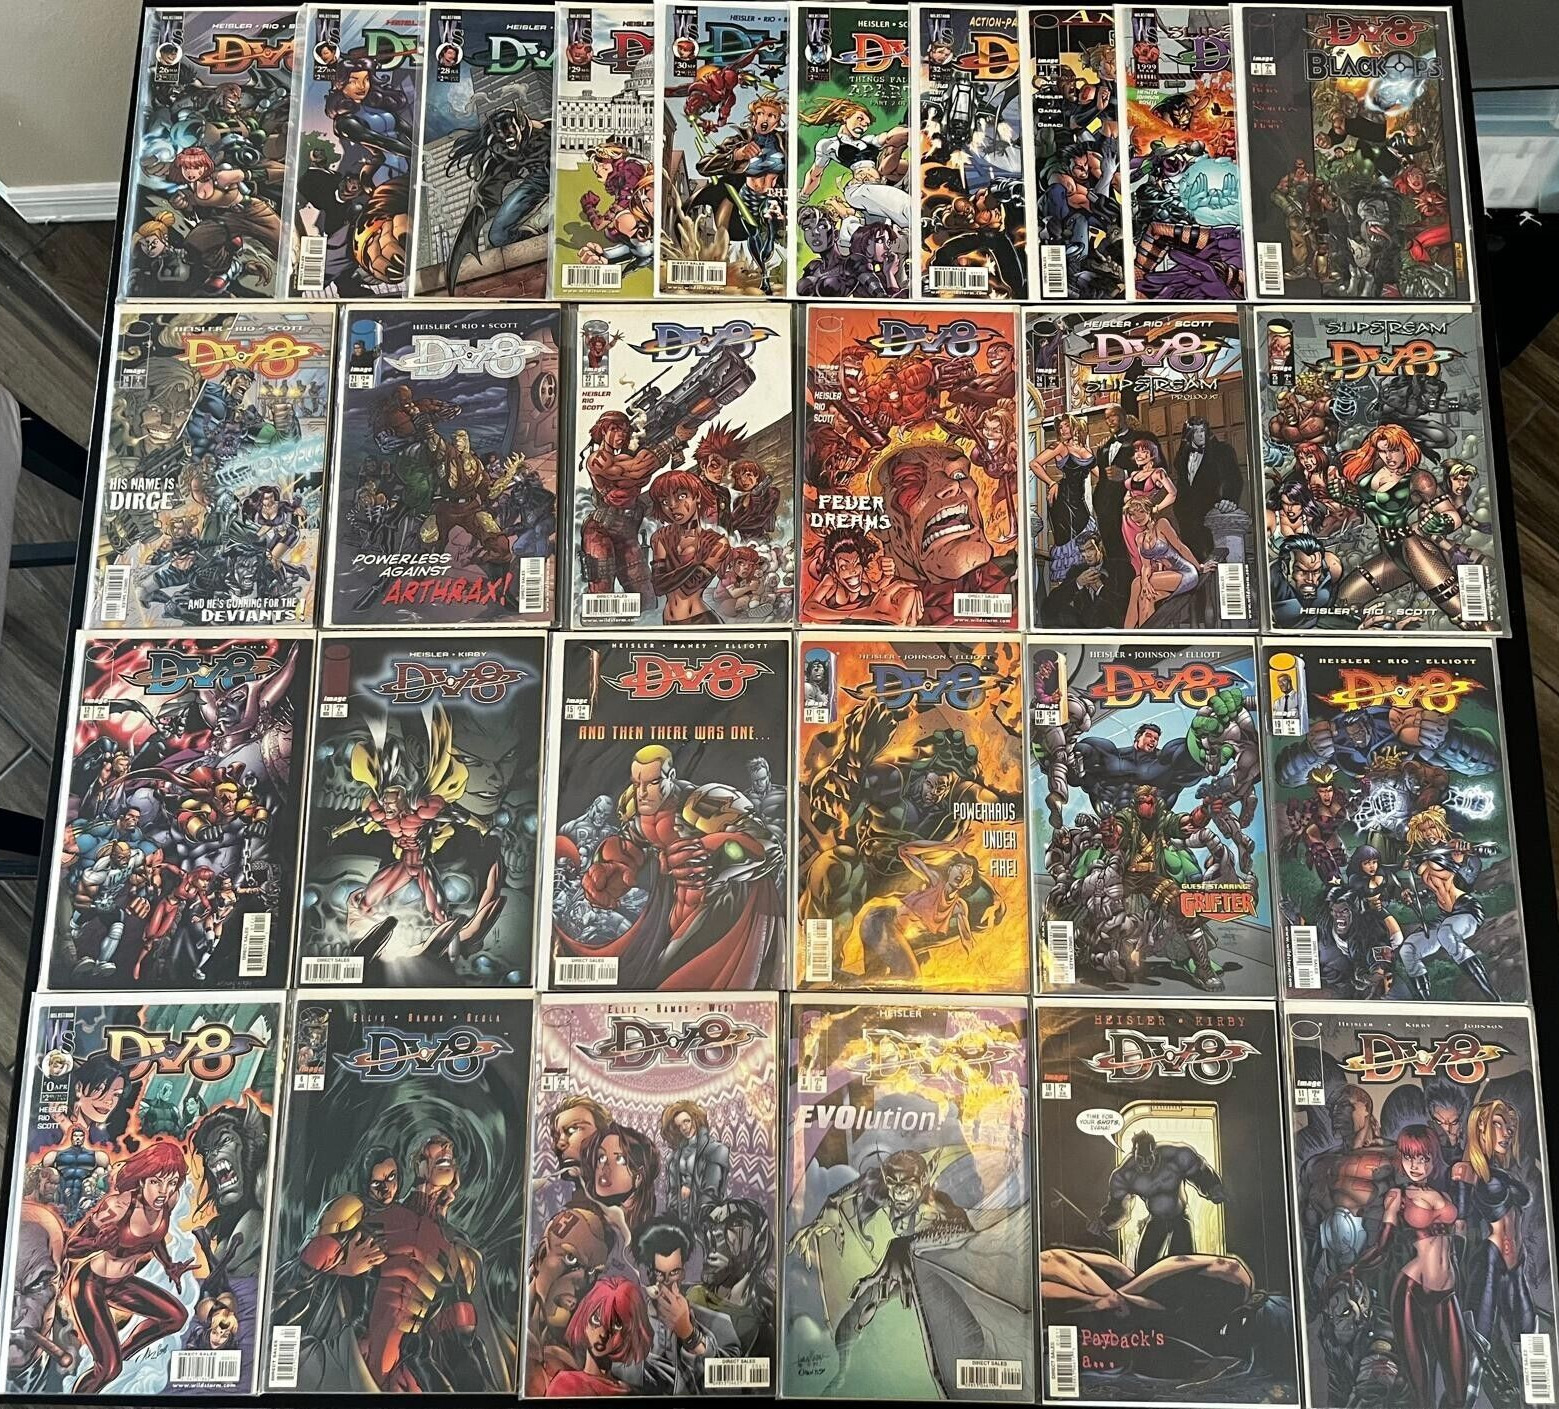 DV8 Comic Lot of 28 Issues - Image Wildstorm Comics with #0 and MANY MORE